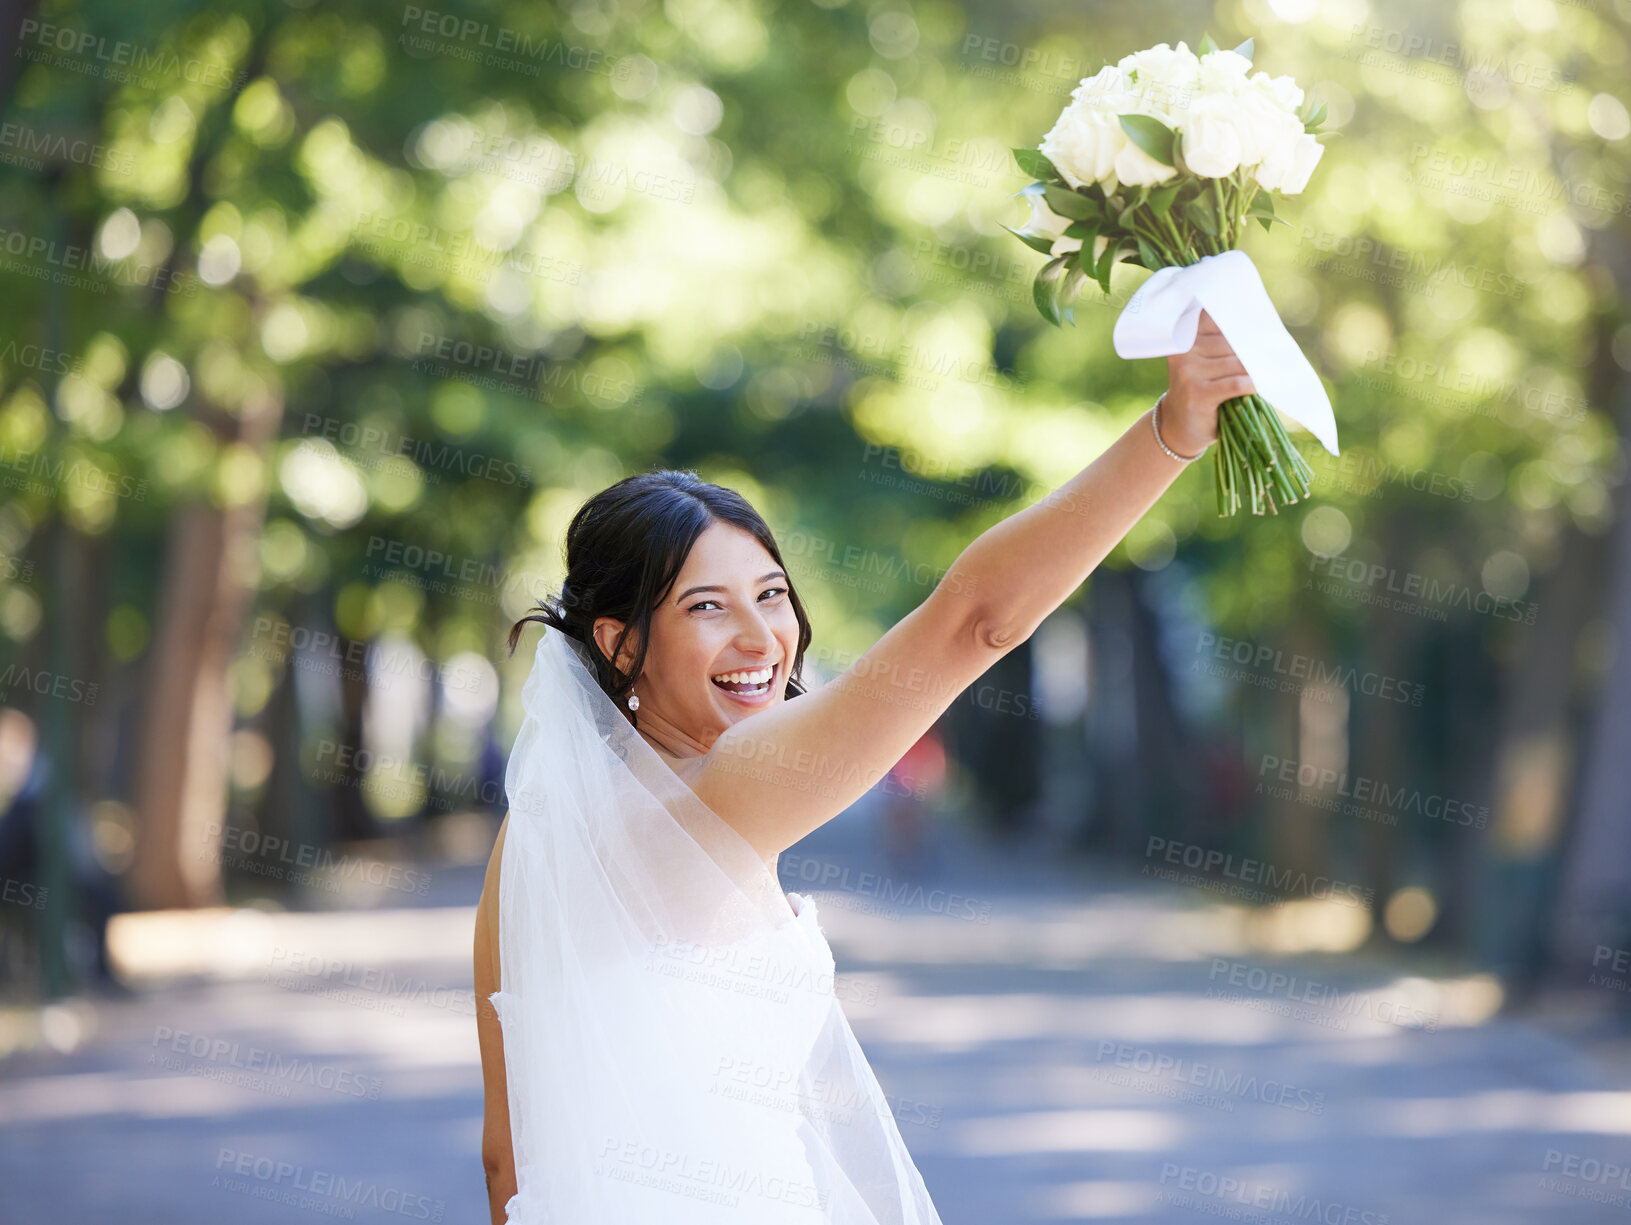 Buy stock photo Cheerful bride standing outside and lifting her wedding bouquet. Bride getting ready to throw bouquet celebrating wedding tradition